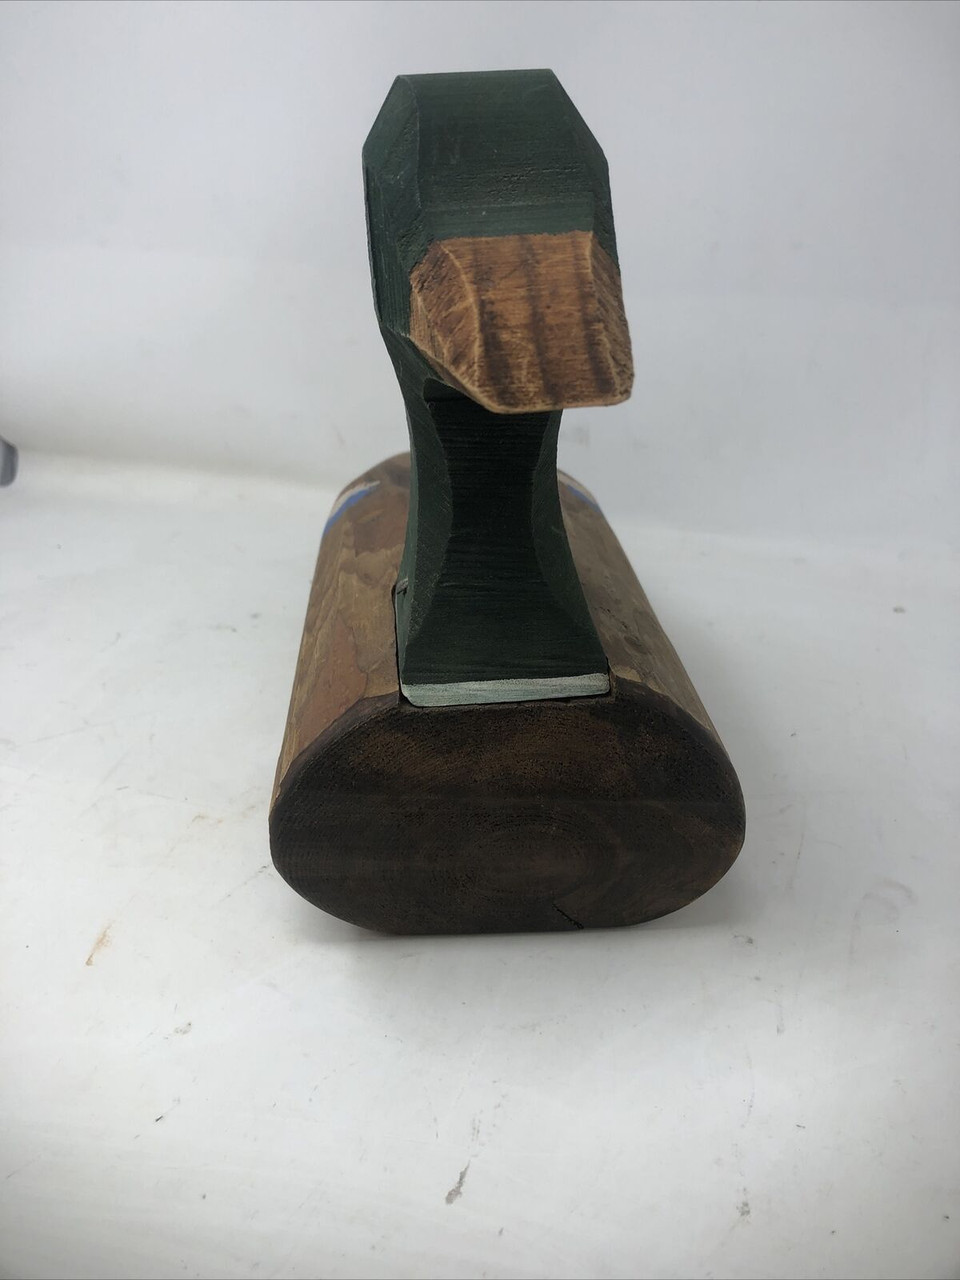 VINTAGE DUCK DECOY BY H HEAP III THE DECOY SHOP FREEPORT MAINE - PREOWNED